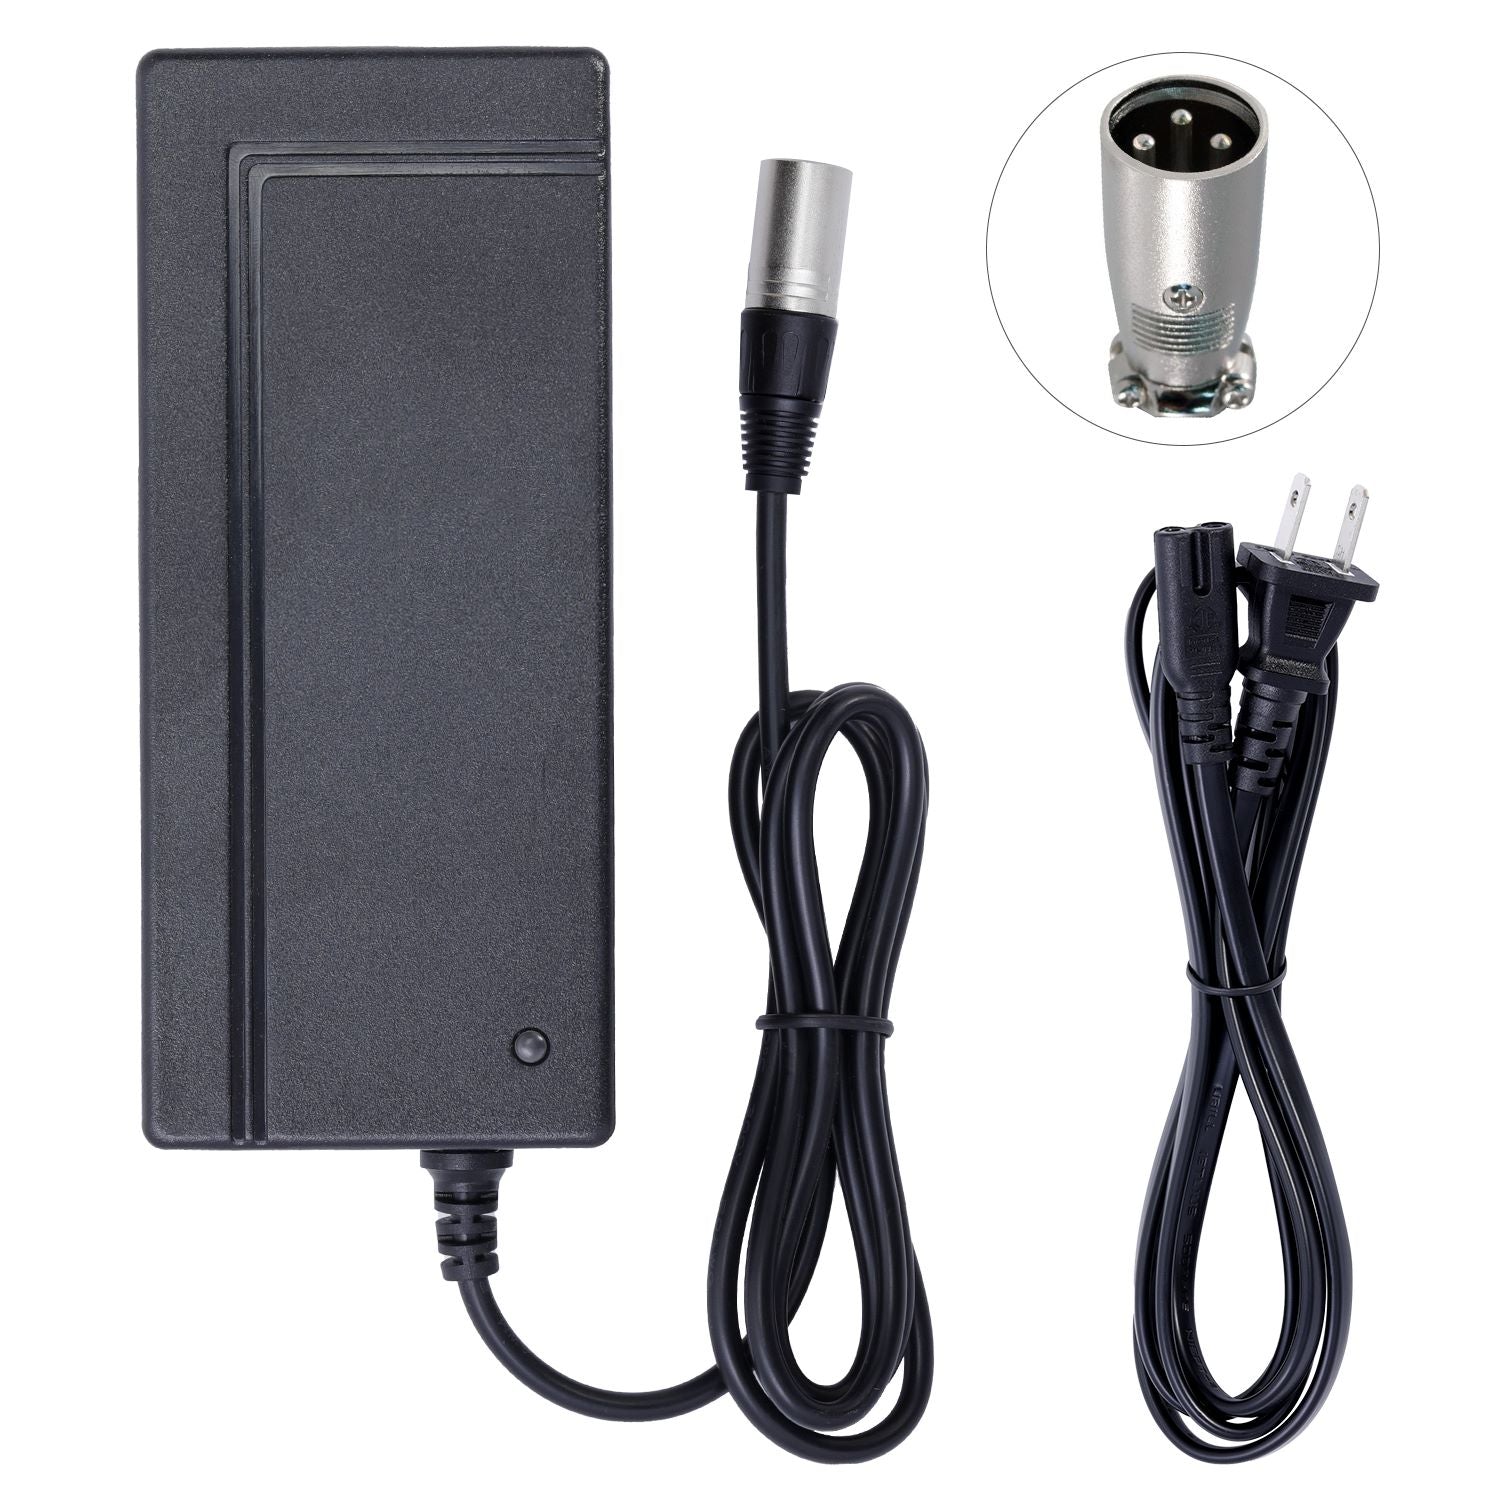 Charger for Pacesaver Scout M1-350 Electric Power Chair.